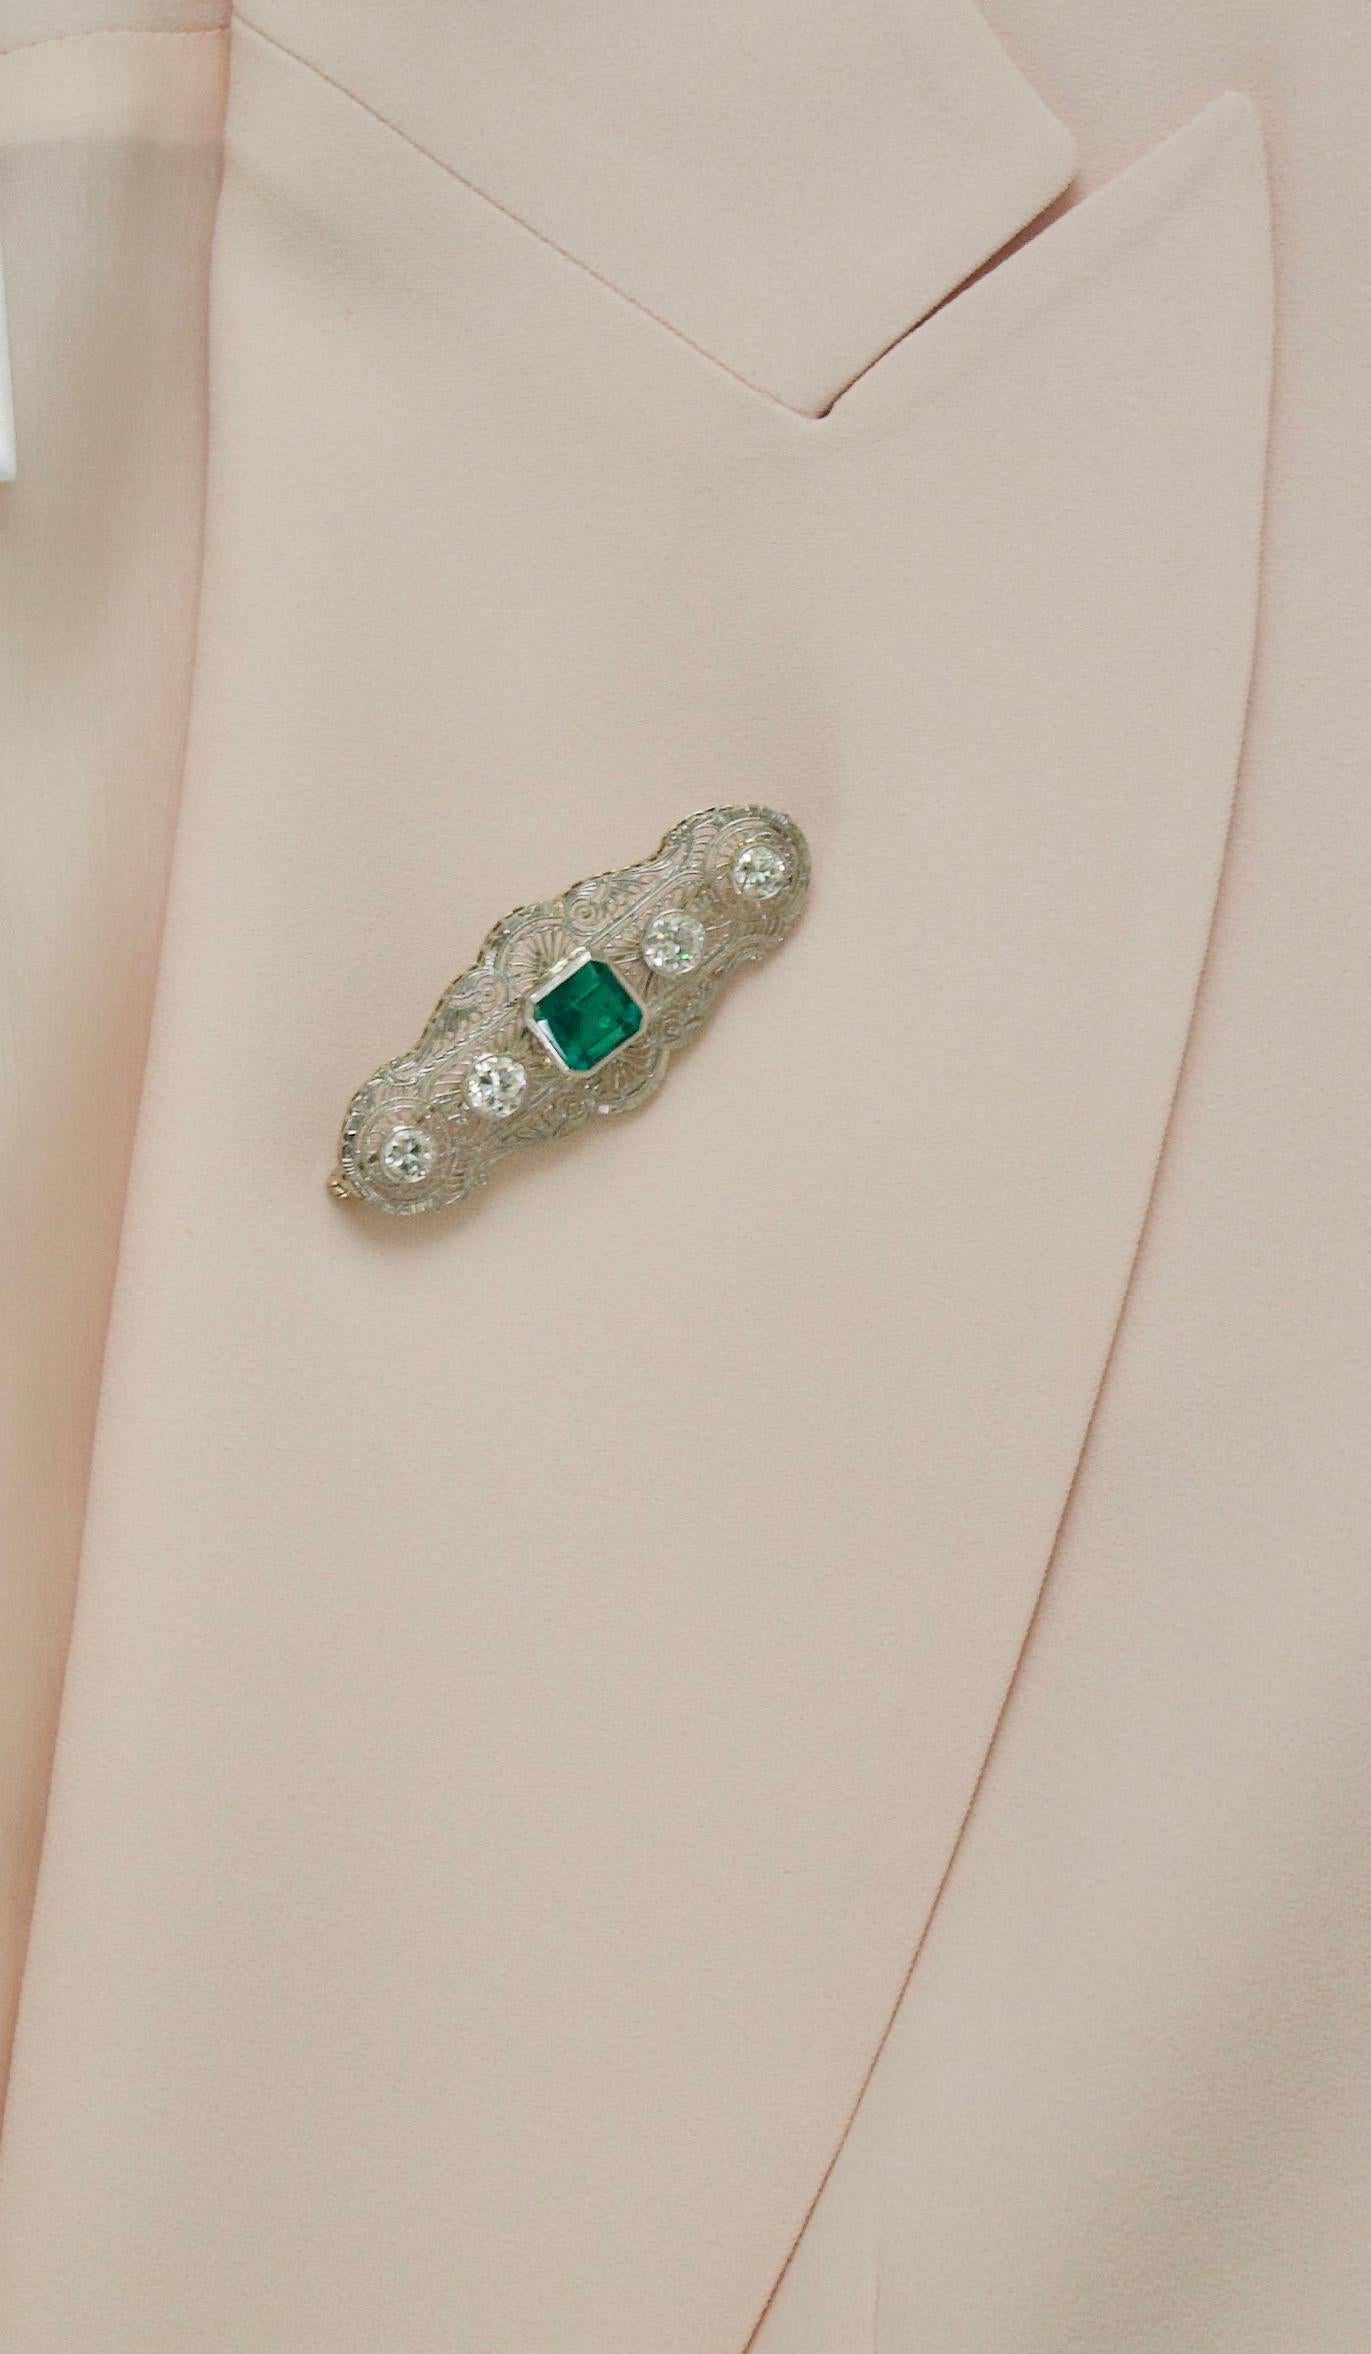 Emerald Cut Colombian Emerald and Diamond Brooch circa 1920s GIA Certified